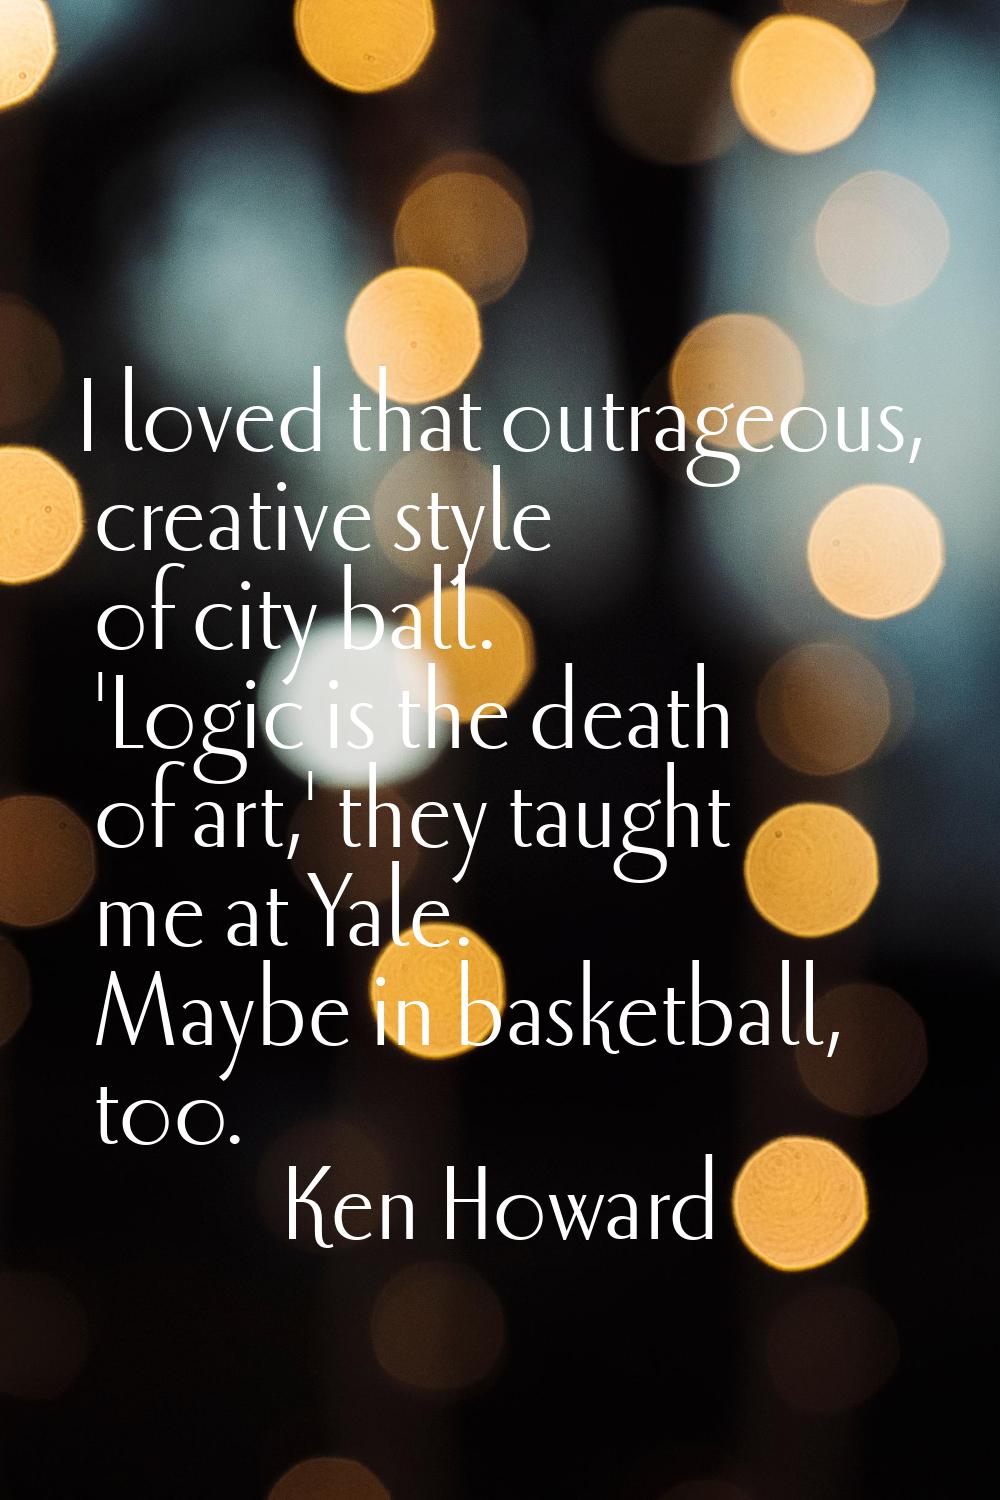 I loved that outrageous, creative style of city ball. 'Logic is the death of art,' they taught me a